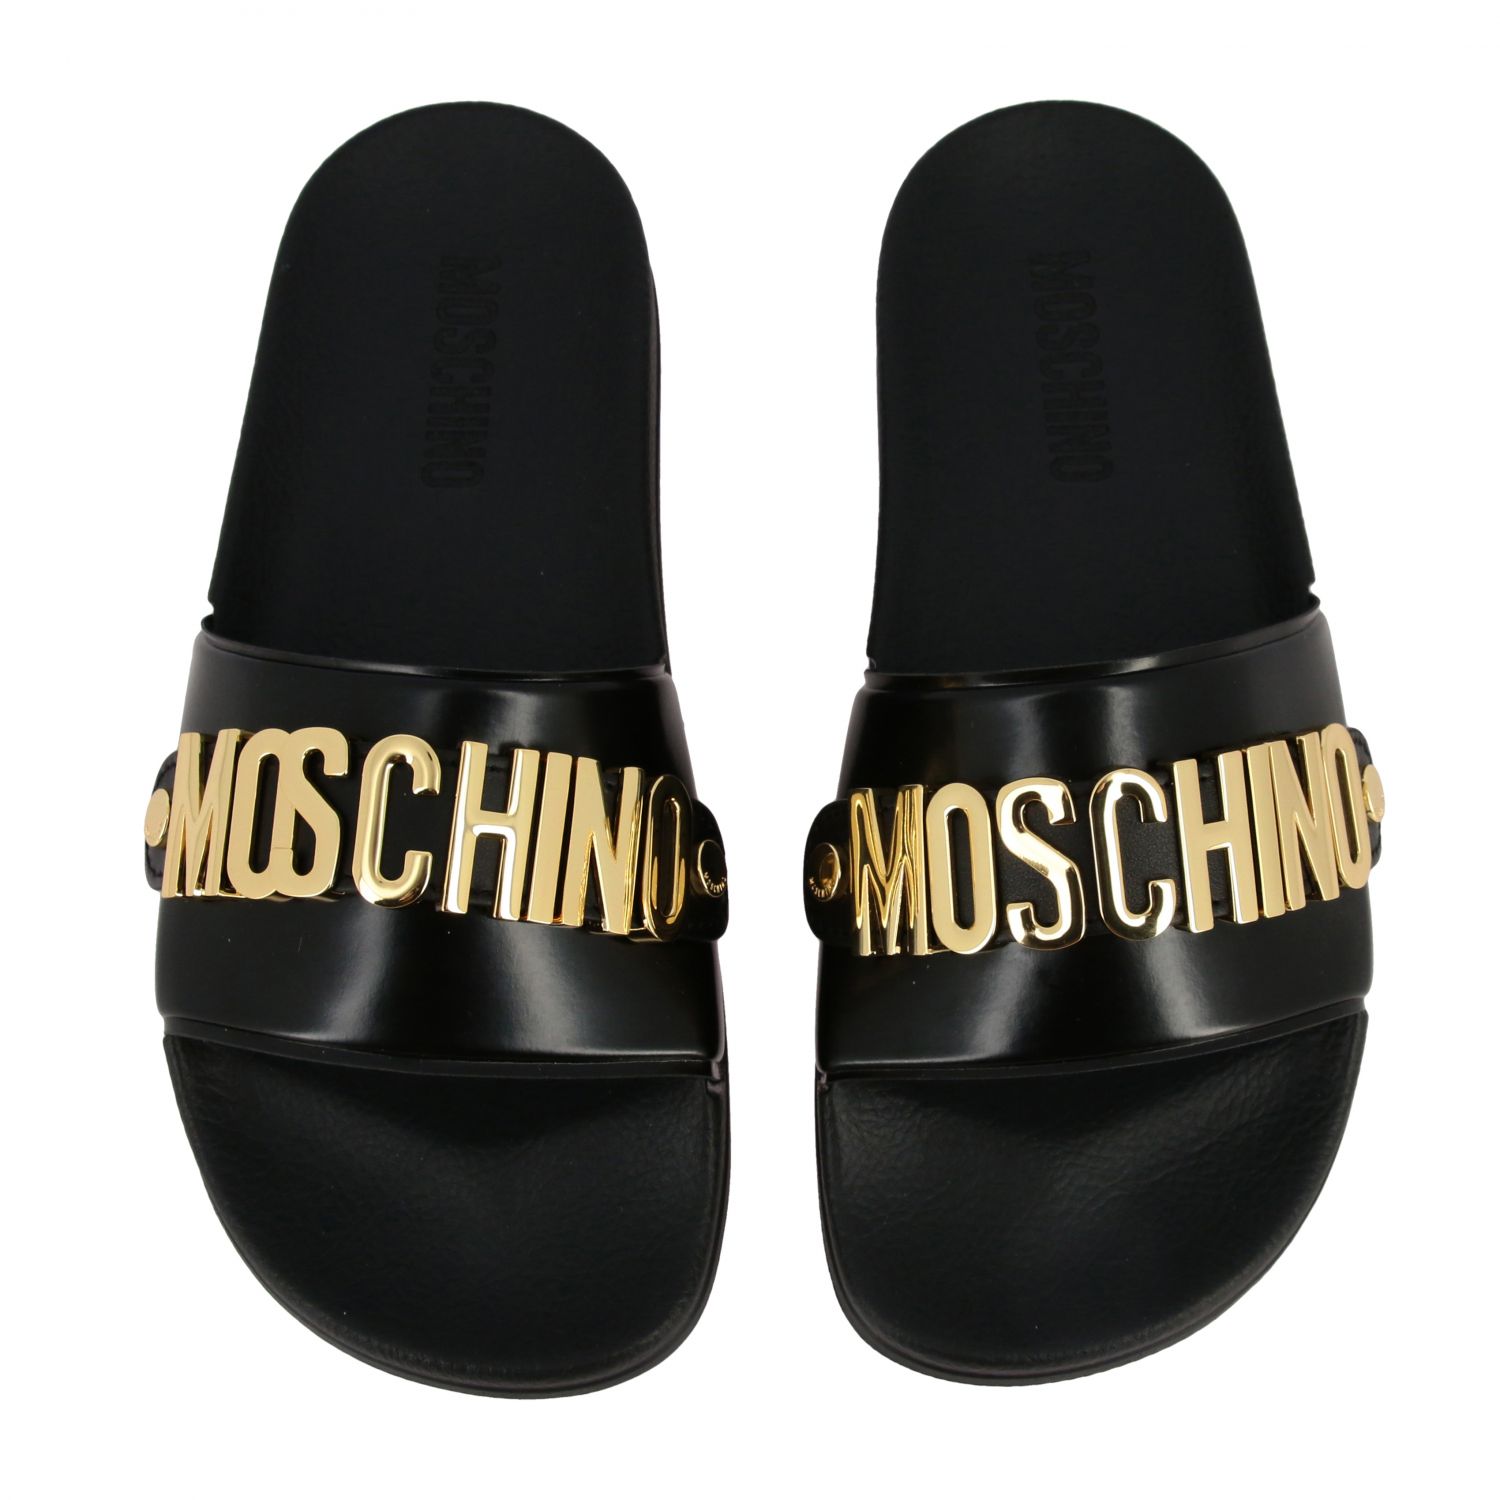 Flat Sandals Moschino Couture 